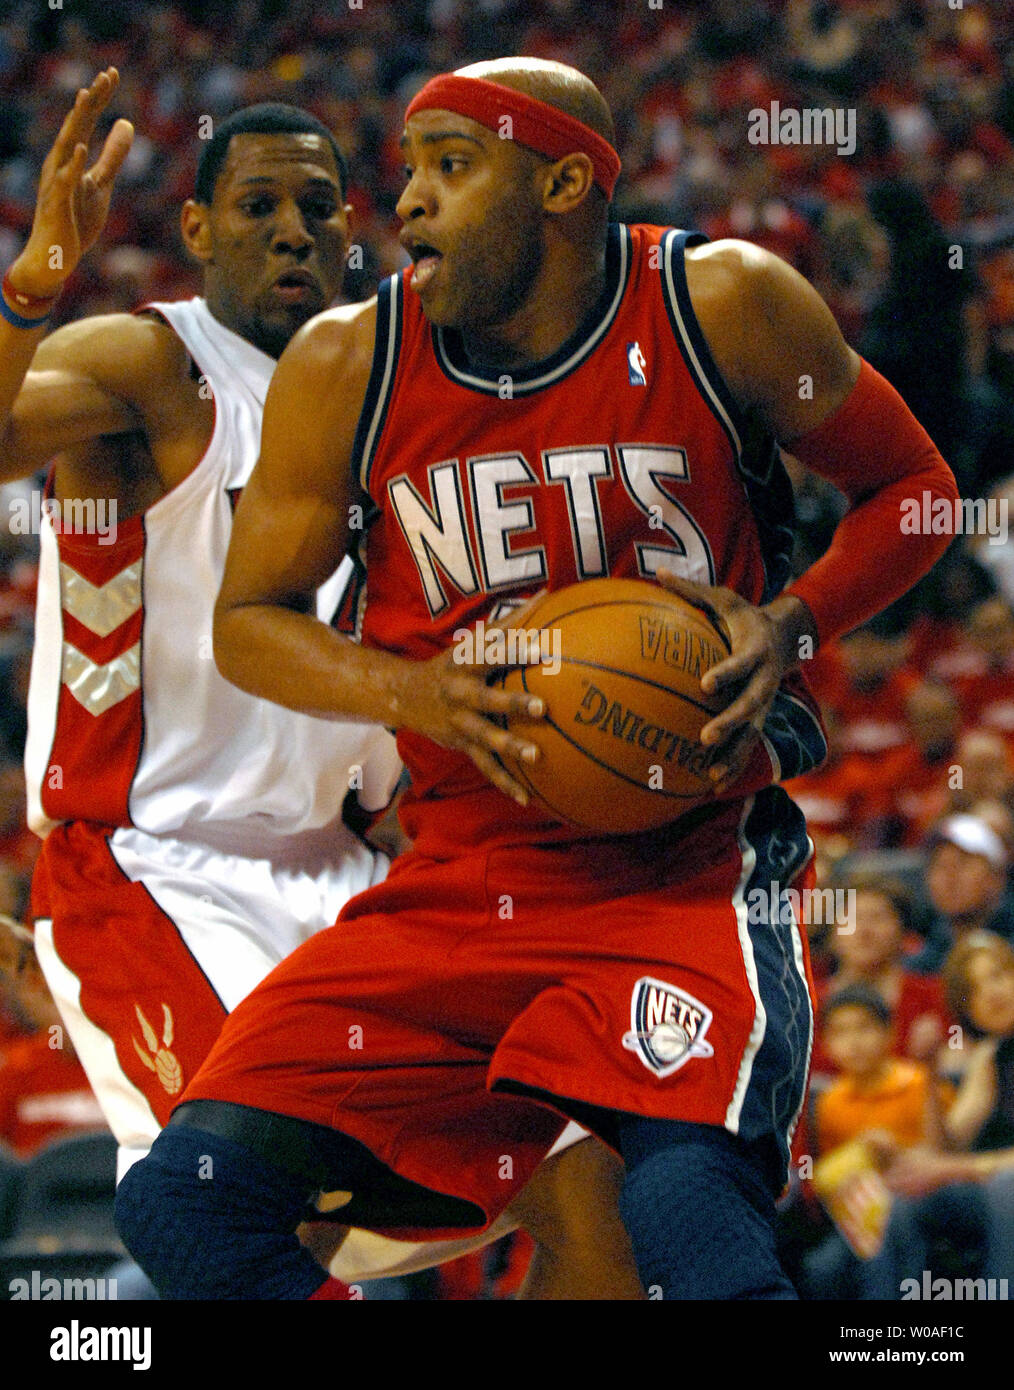 New Jersey Nets' Vince Carter takes aim at the basket during second quarter  action against his former team the Toronto Raptors at the Air Canada Center  on January 8, 2006 in Toronto